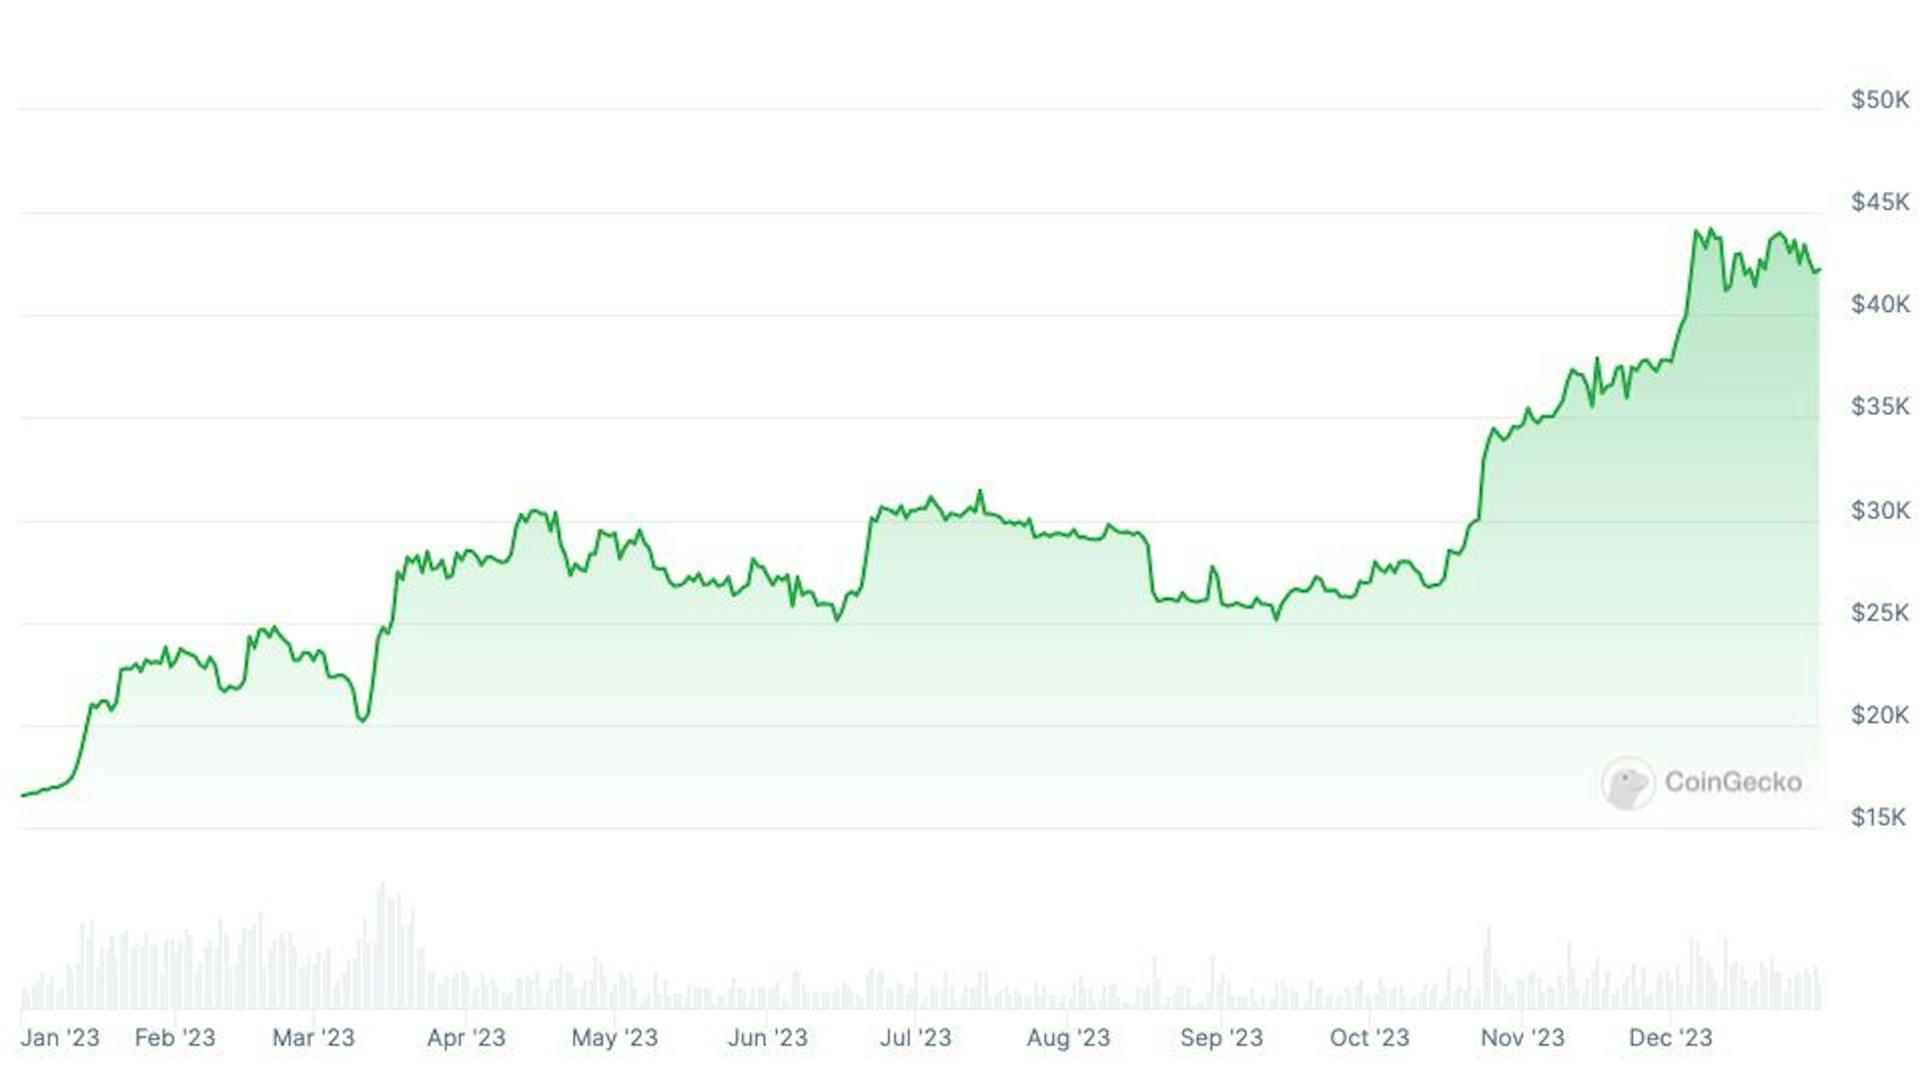 2023 Bitcoin prices in US$ via CoinGecko